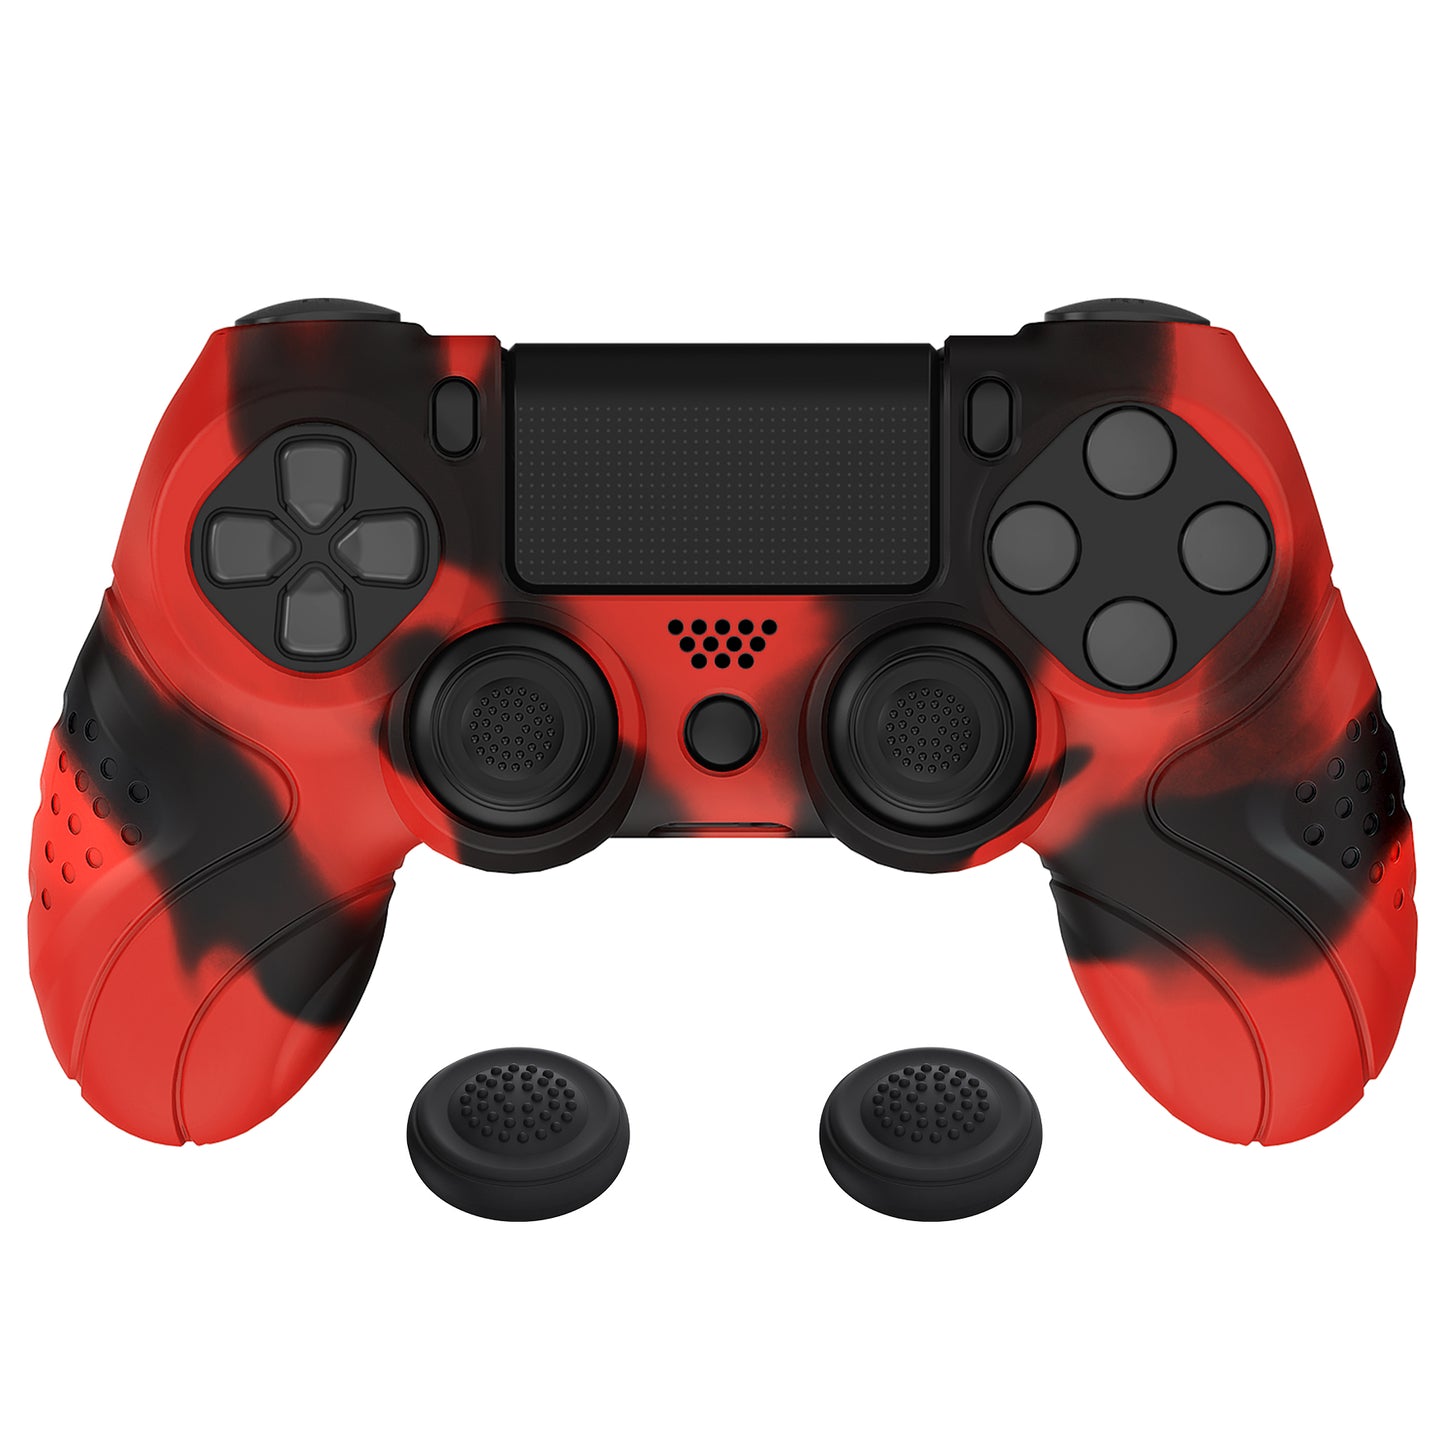 PlayVital Guardian Edition Red & Black Ergonomic Soft Anti-Slip Controller Silicone Case Cover for PS4, Rubber Protector Skins with black Joystick Caps for PS4 Slim PS4 Pro Controller - P4CC0071 playvital